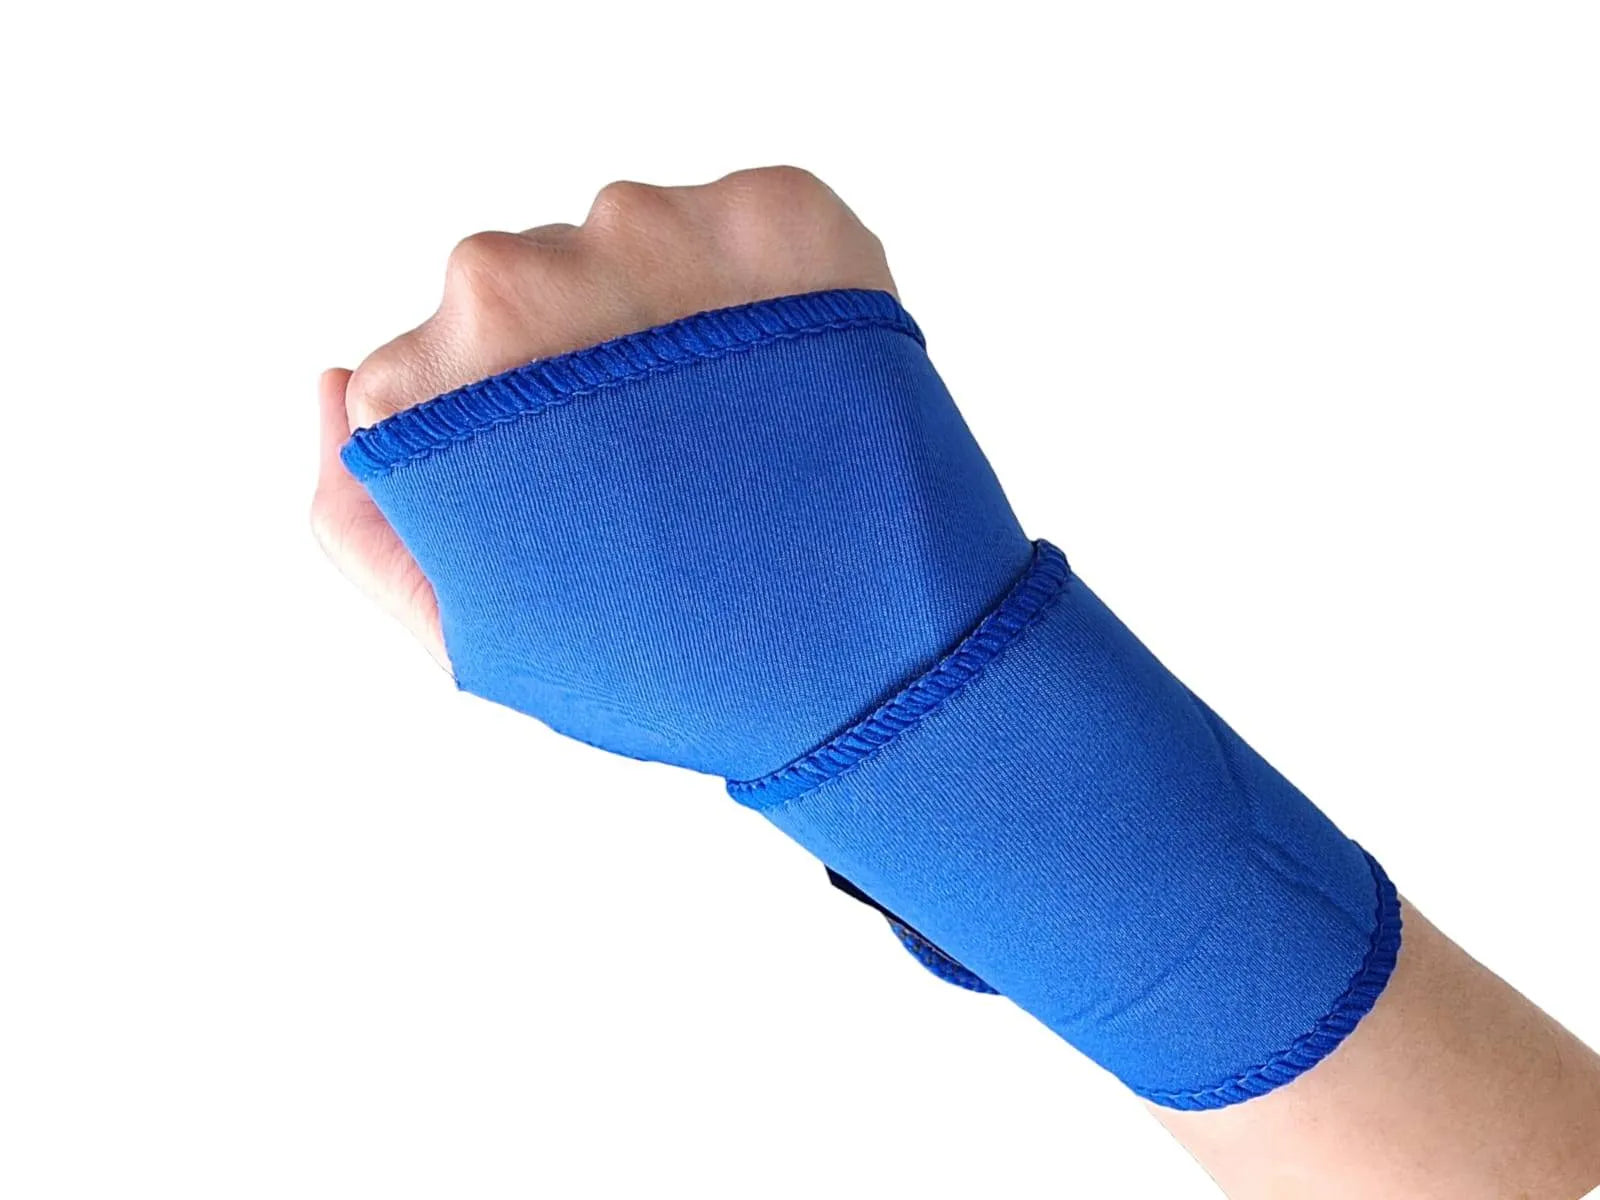 Image of a Weilong Wrist Support worn on a person's wrist, showcasing its design and comfortable fit.